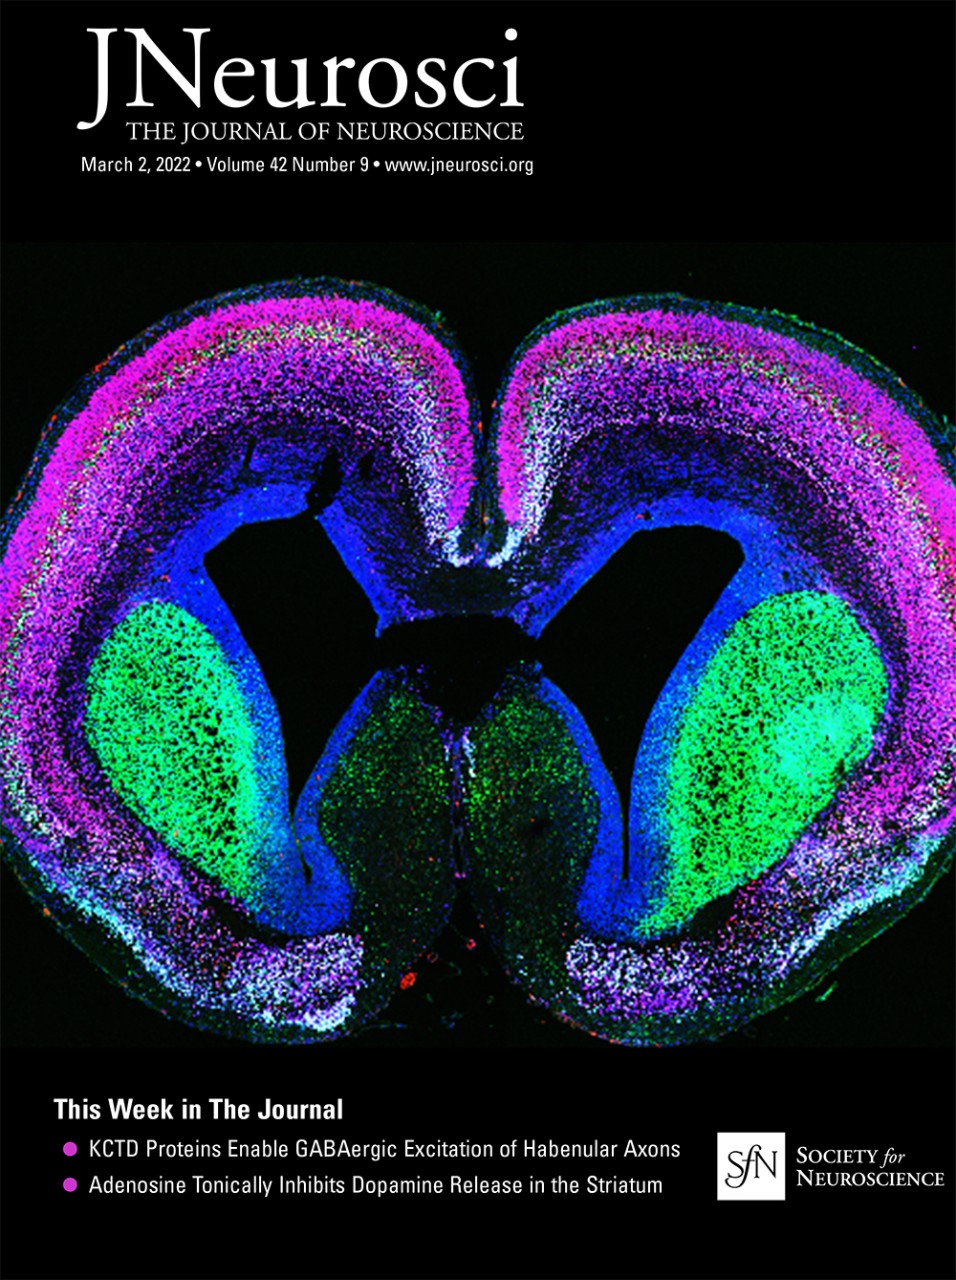 cover featuring brain image